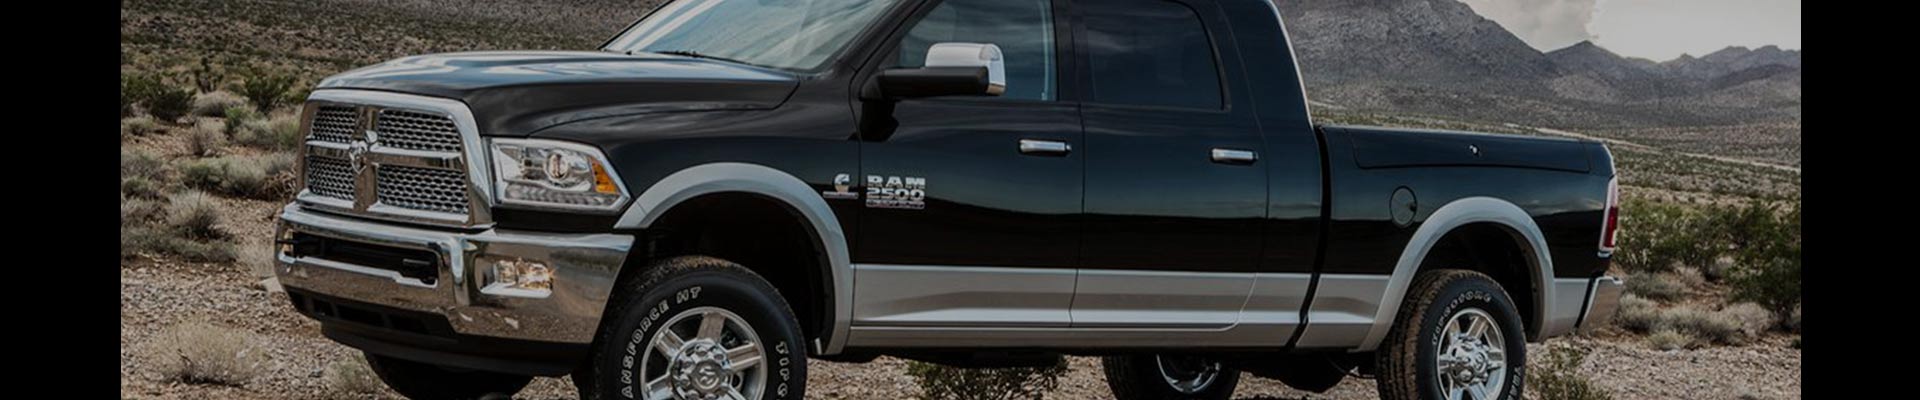 Shop Replacement and OEM 2017 Ram 2500 Parts with Discounted Price on the Net